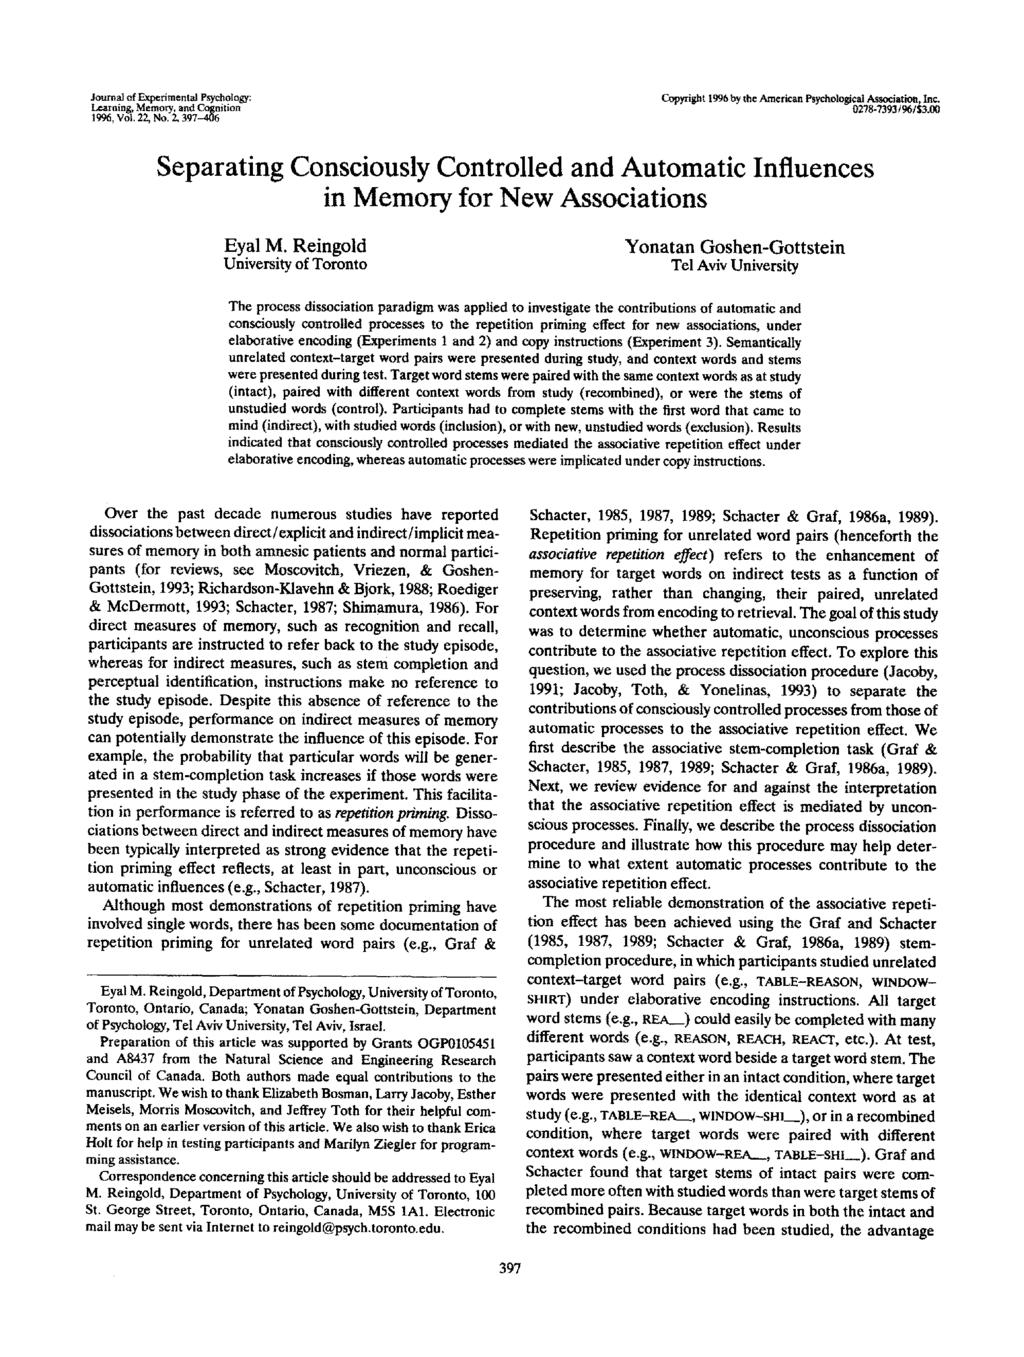 Journal of Experimental Psychology: Learning, Memory, and Cognition 1996, Vol. 22, No. 2, 397-406 Copyright 1996 by the American Psychological Association, Inc. 0278-7393/96f$3.